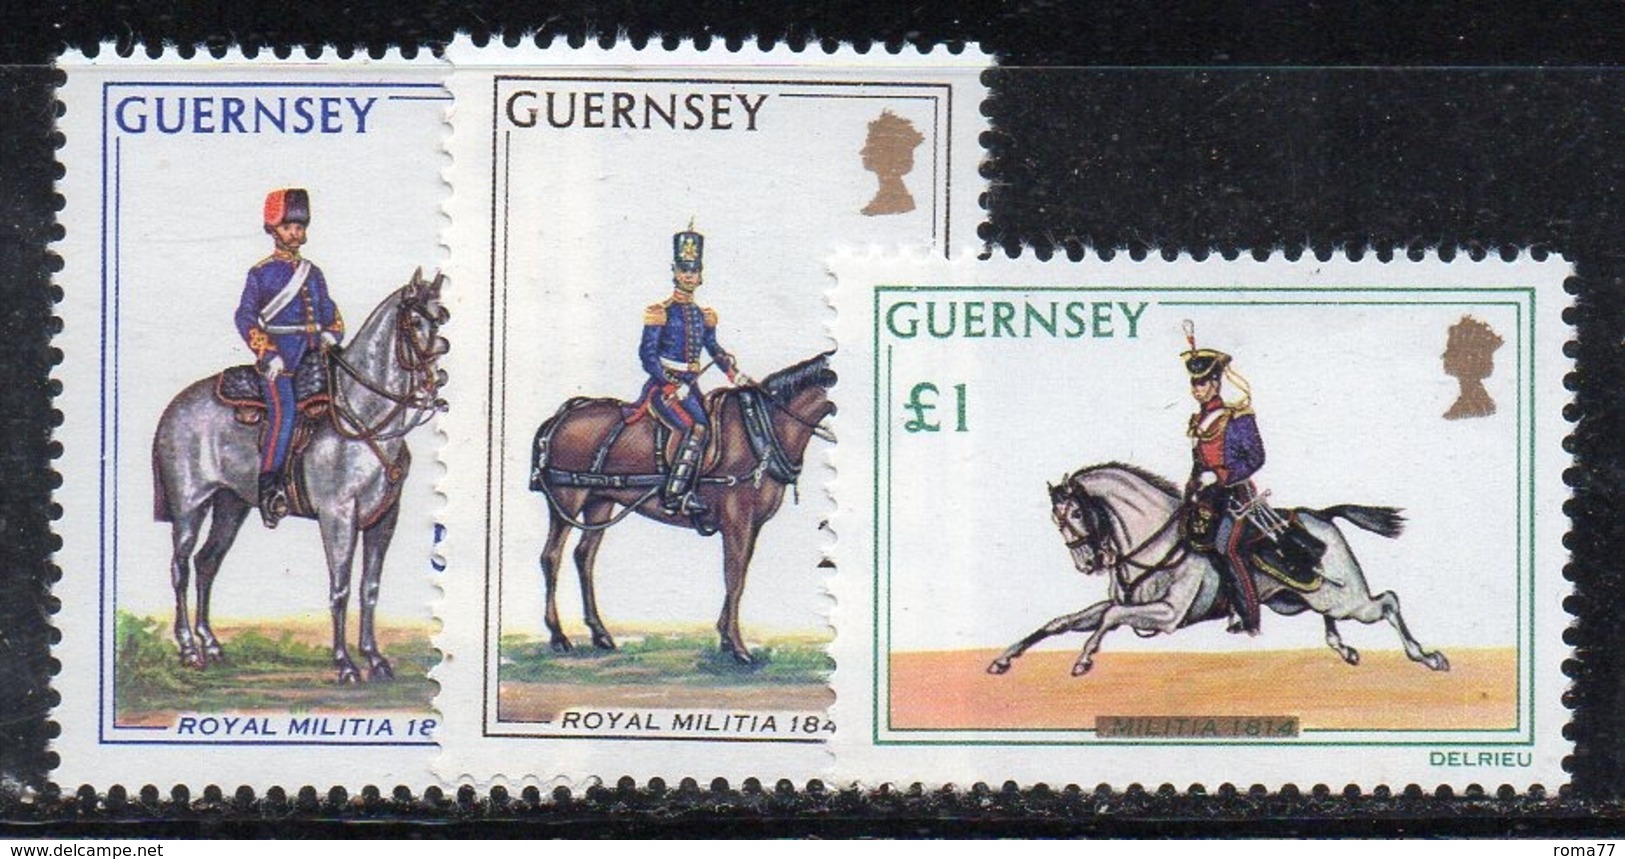 GUERNSEY 1975 , Serie Completa N. 113/115  *** MNH - Guernesey